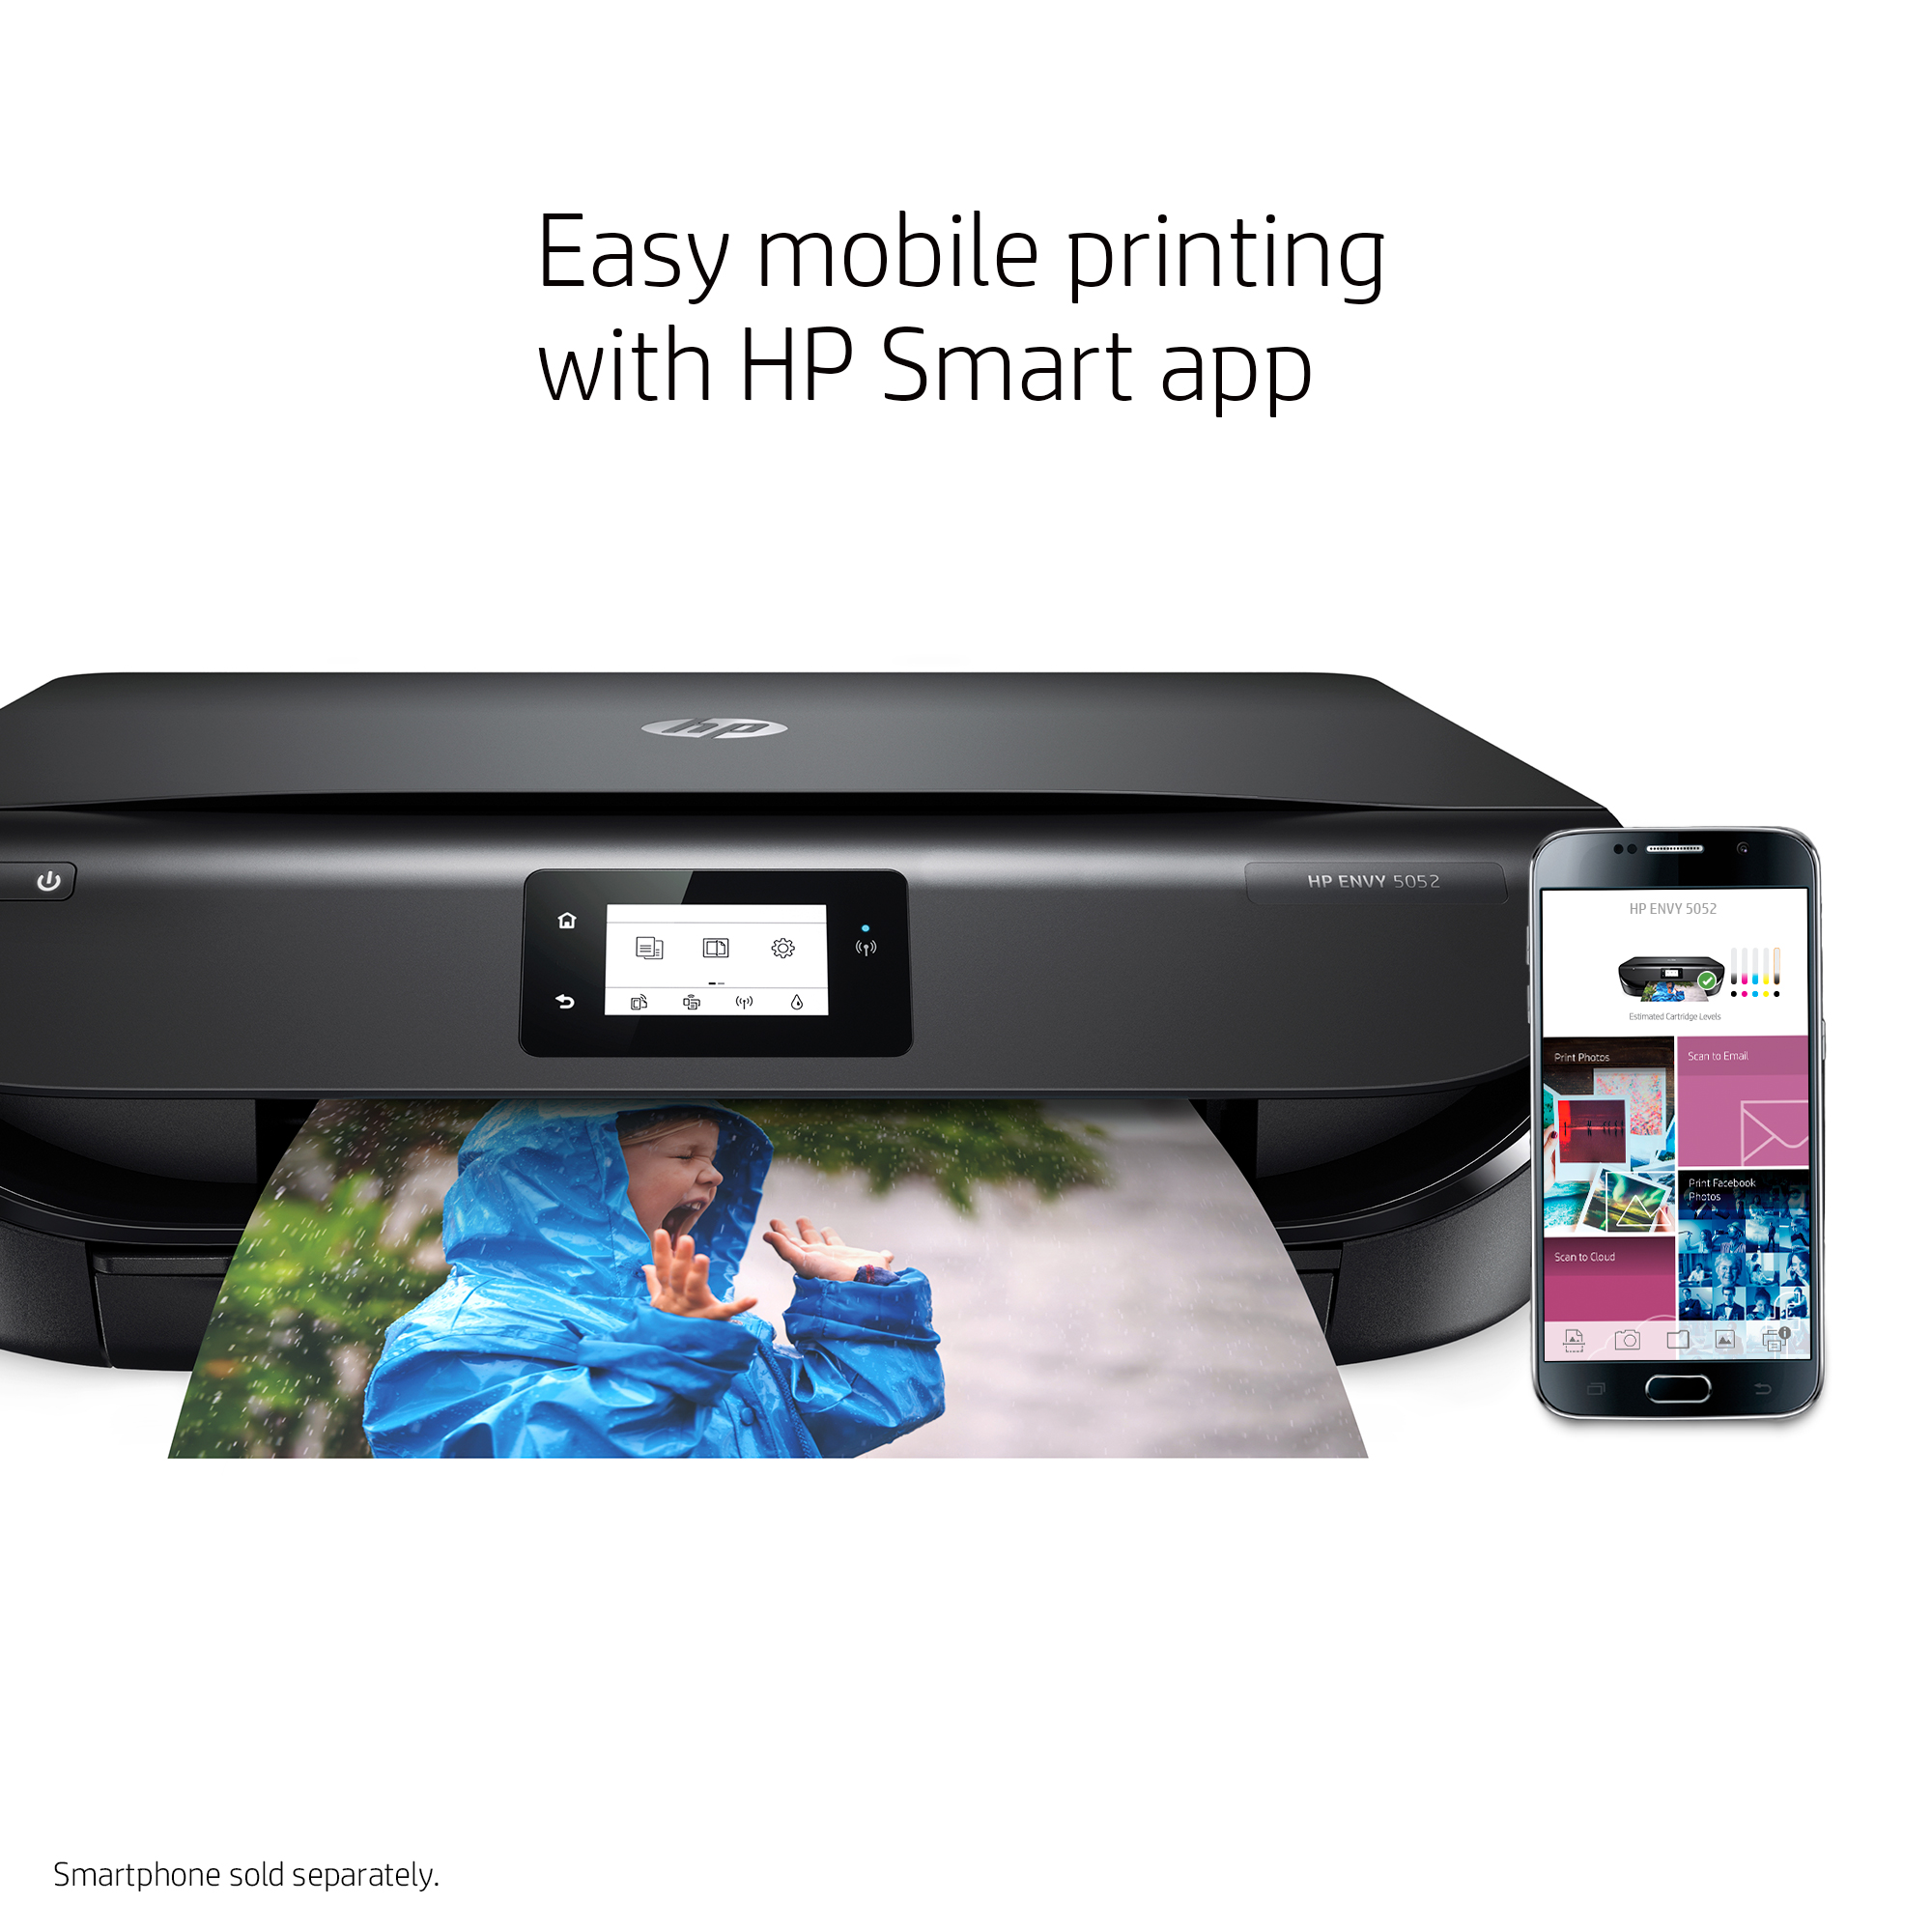 Hp Envy 5052 All-In-One Wireless Color Inkjet Printer (M2U92A) Dual Band Wifi Borderless Photos, Auto 2-Sided Printing, Black - image 5 of 9